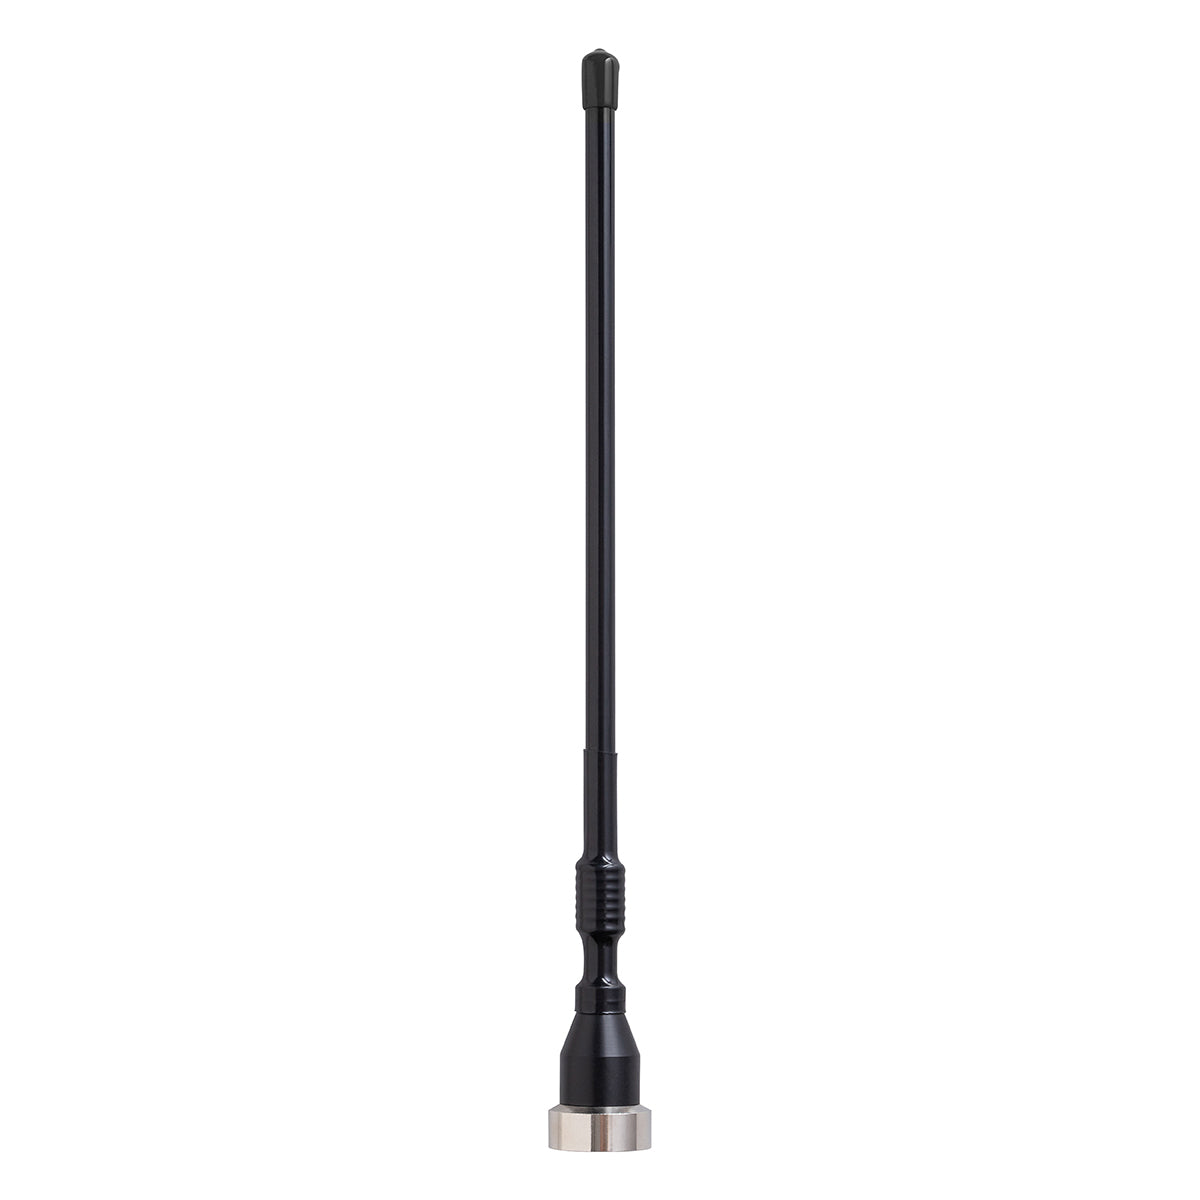 Oricom - 2dbi UHF CB Coaxial Dipole Antenna with NMO connector -